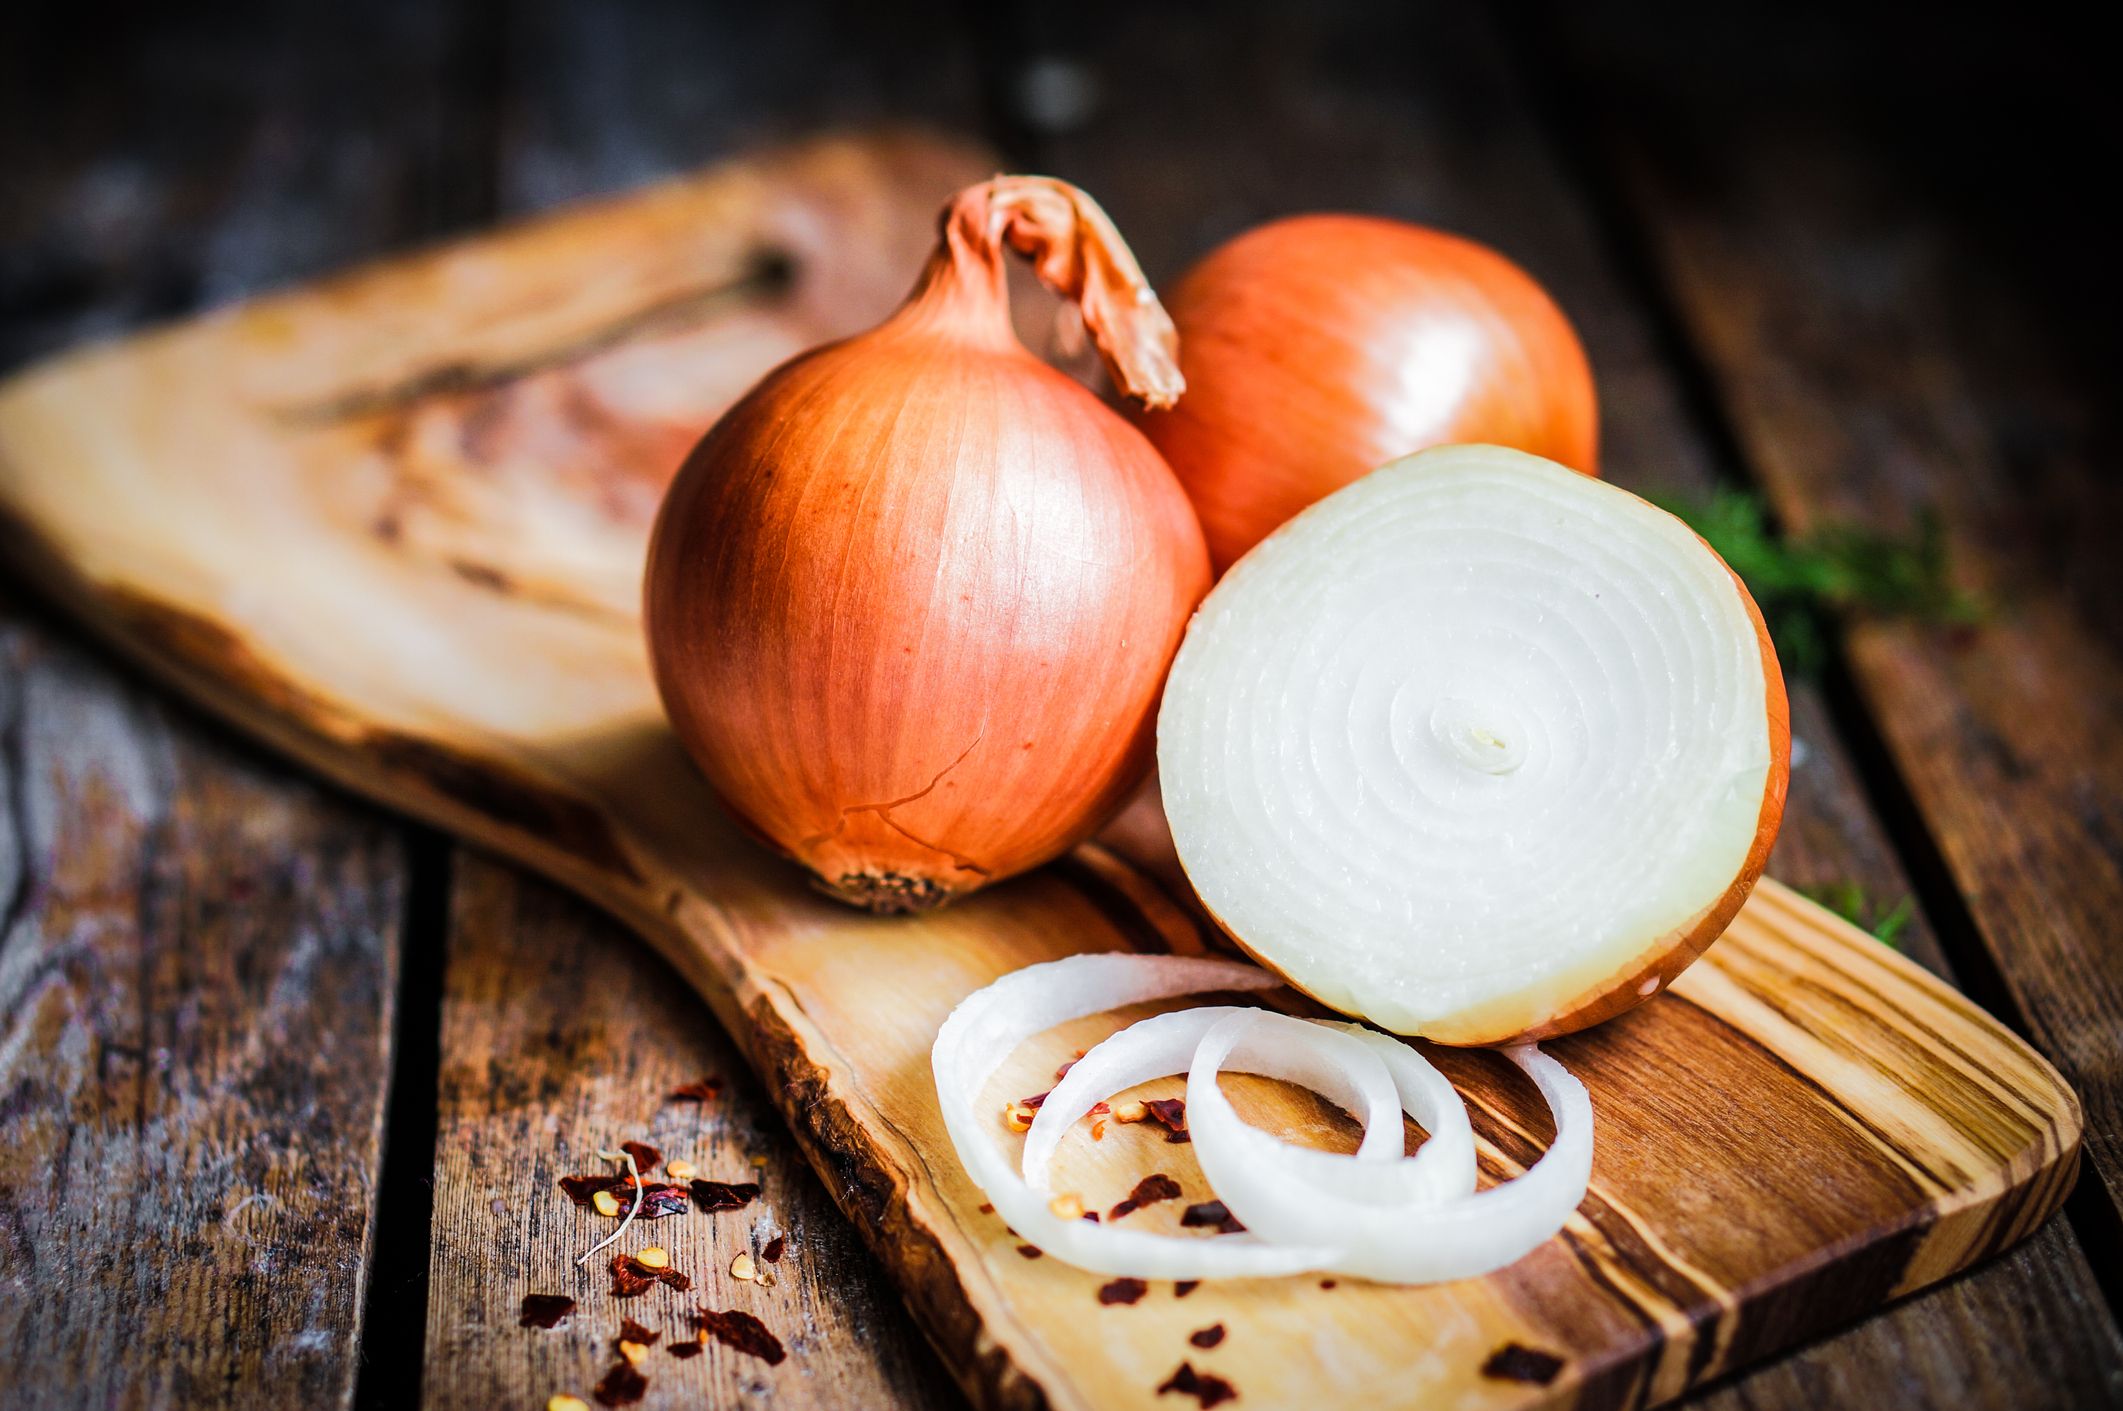 Onion Nutritional Facts - Health Benefits of Onions